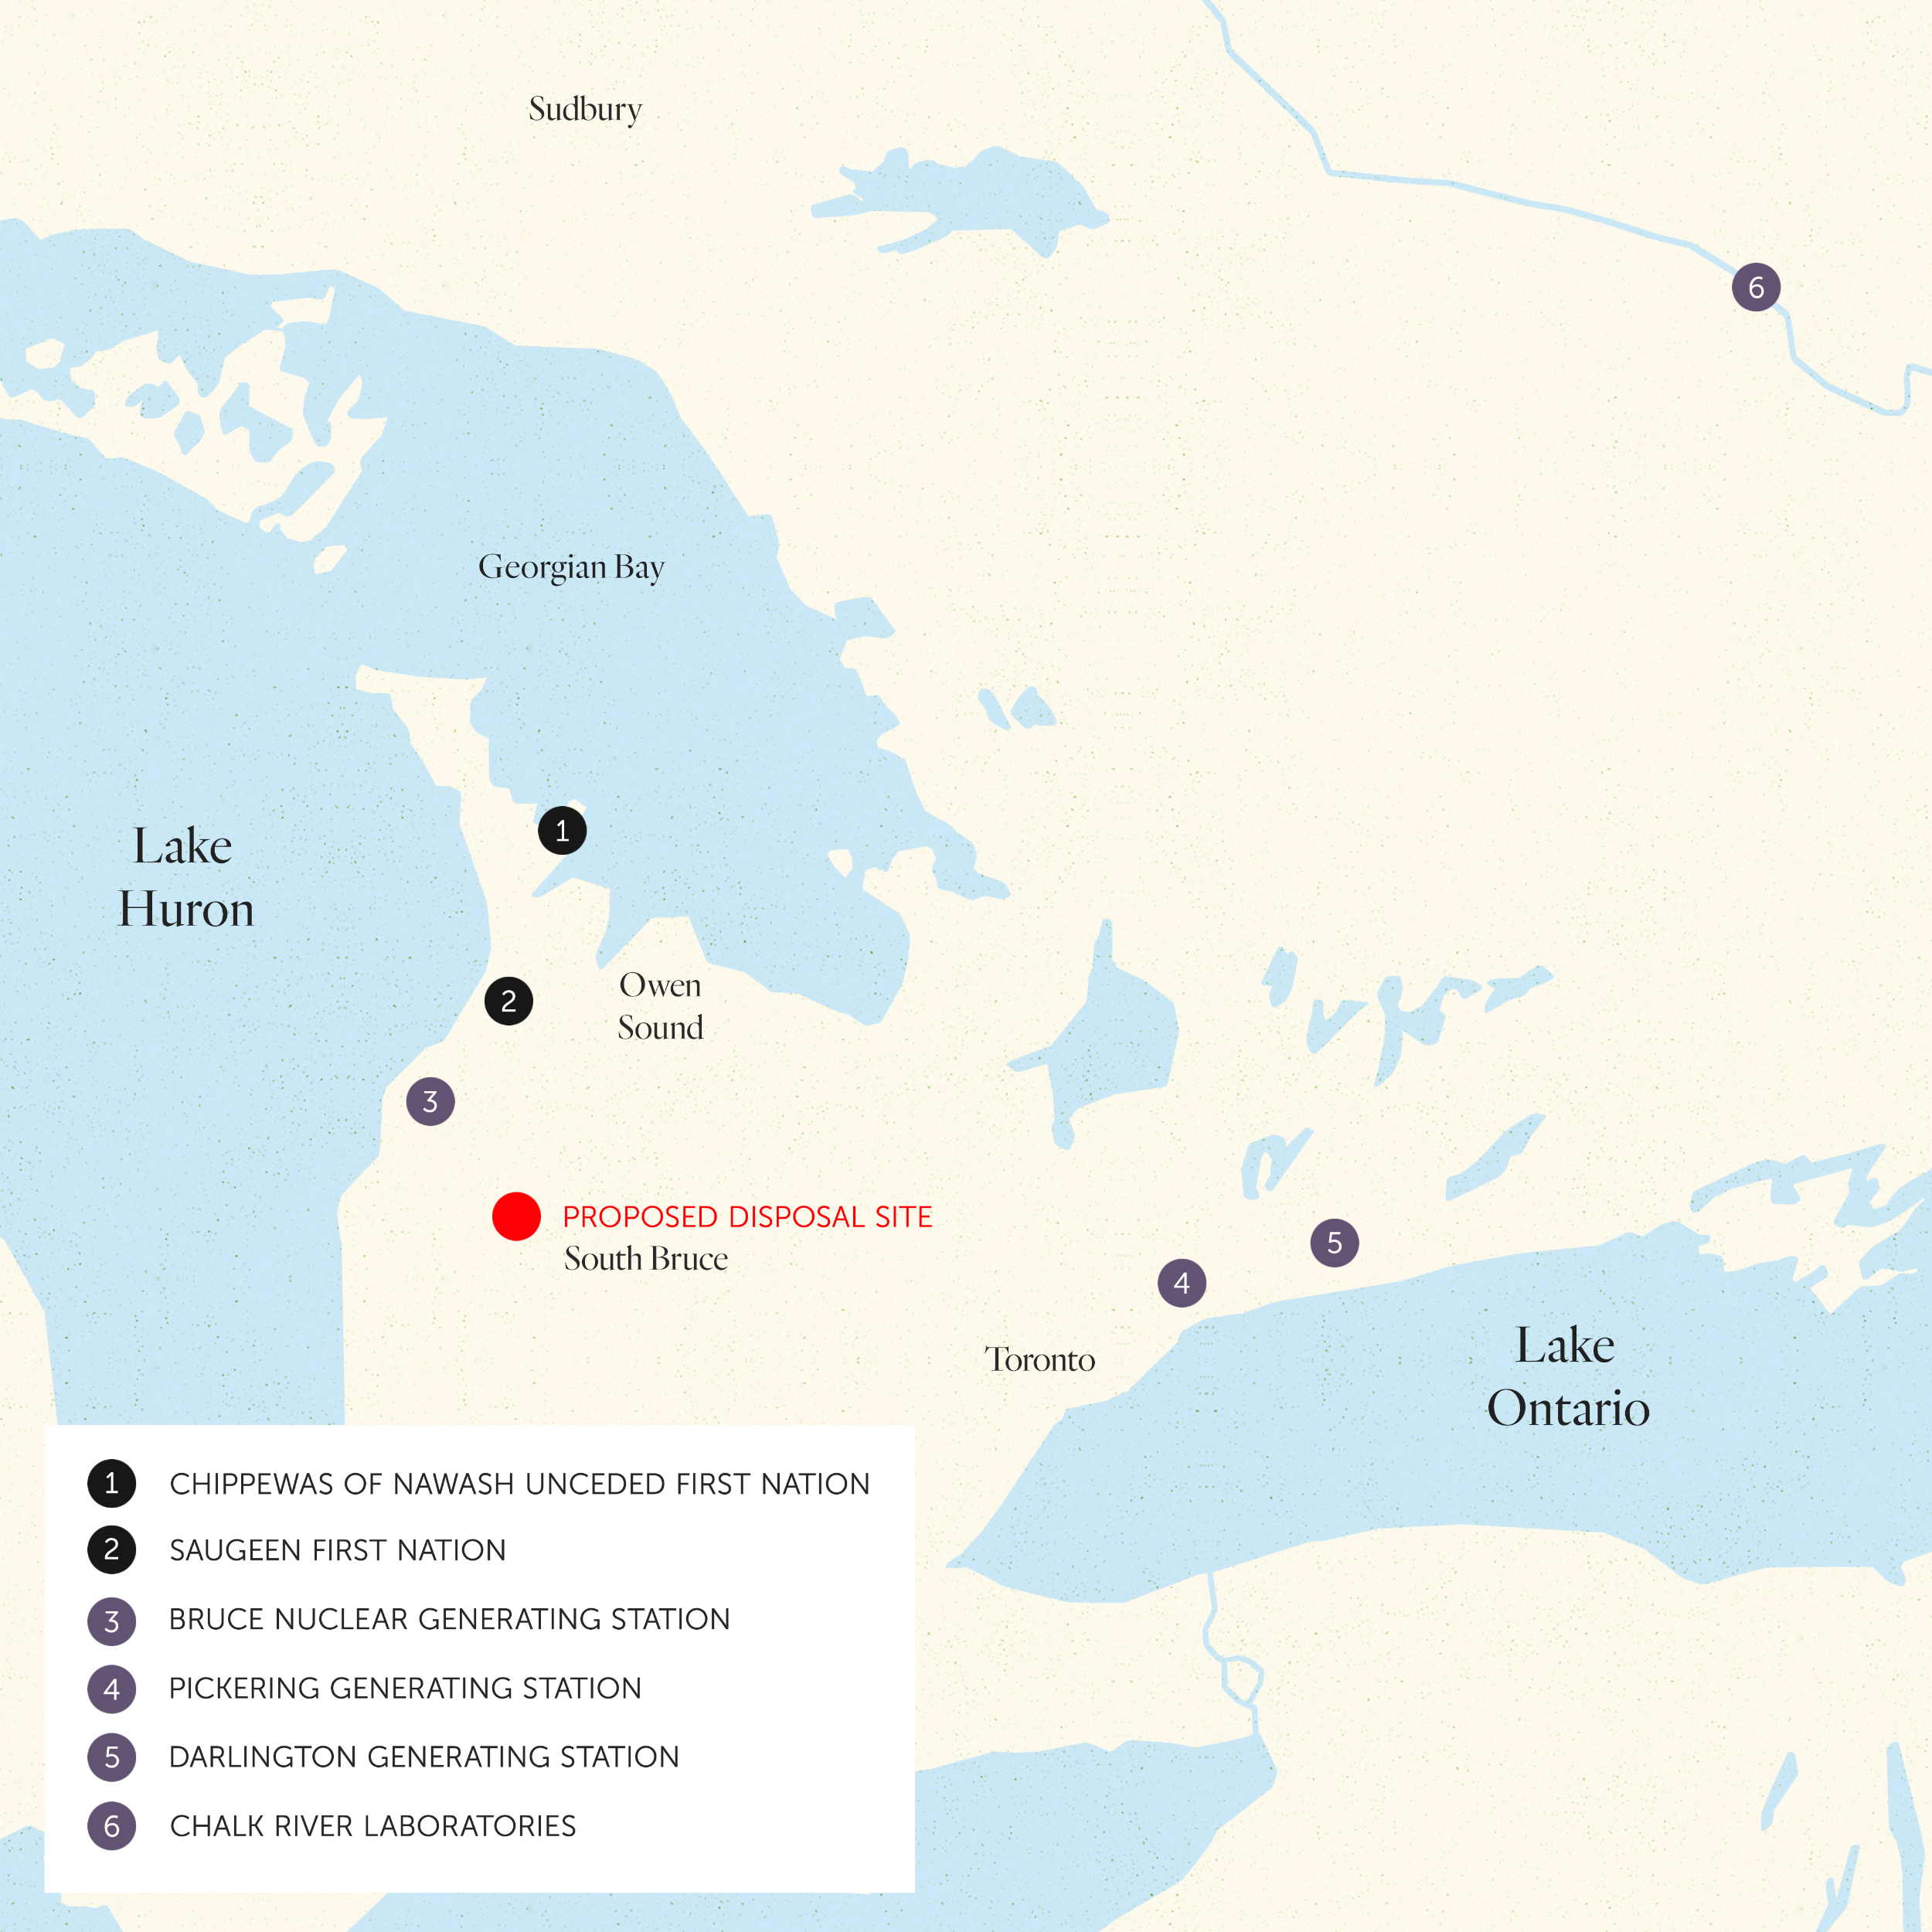 A map showing the Nuclear Waste Management Organization's proposed location for a nuclear waste disposal site on the Bruce Peninsula, south of Lake Huron and close to the Chippewas of Nawash Unceded First Nation and Saugeen First Nation. The map also shows the locations of the facilities that produce nuclear waste in Ontario: Bruce Nuclear Generating Station, Pickering Generating Station, Darlington Generating Station and Chalk River Laboratories.